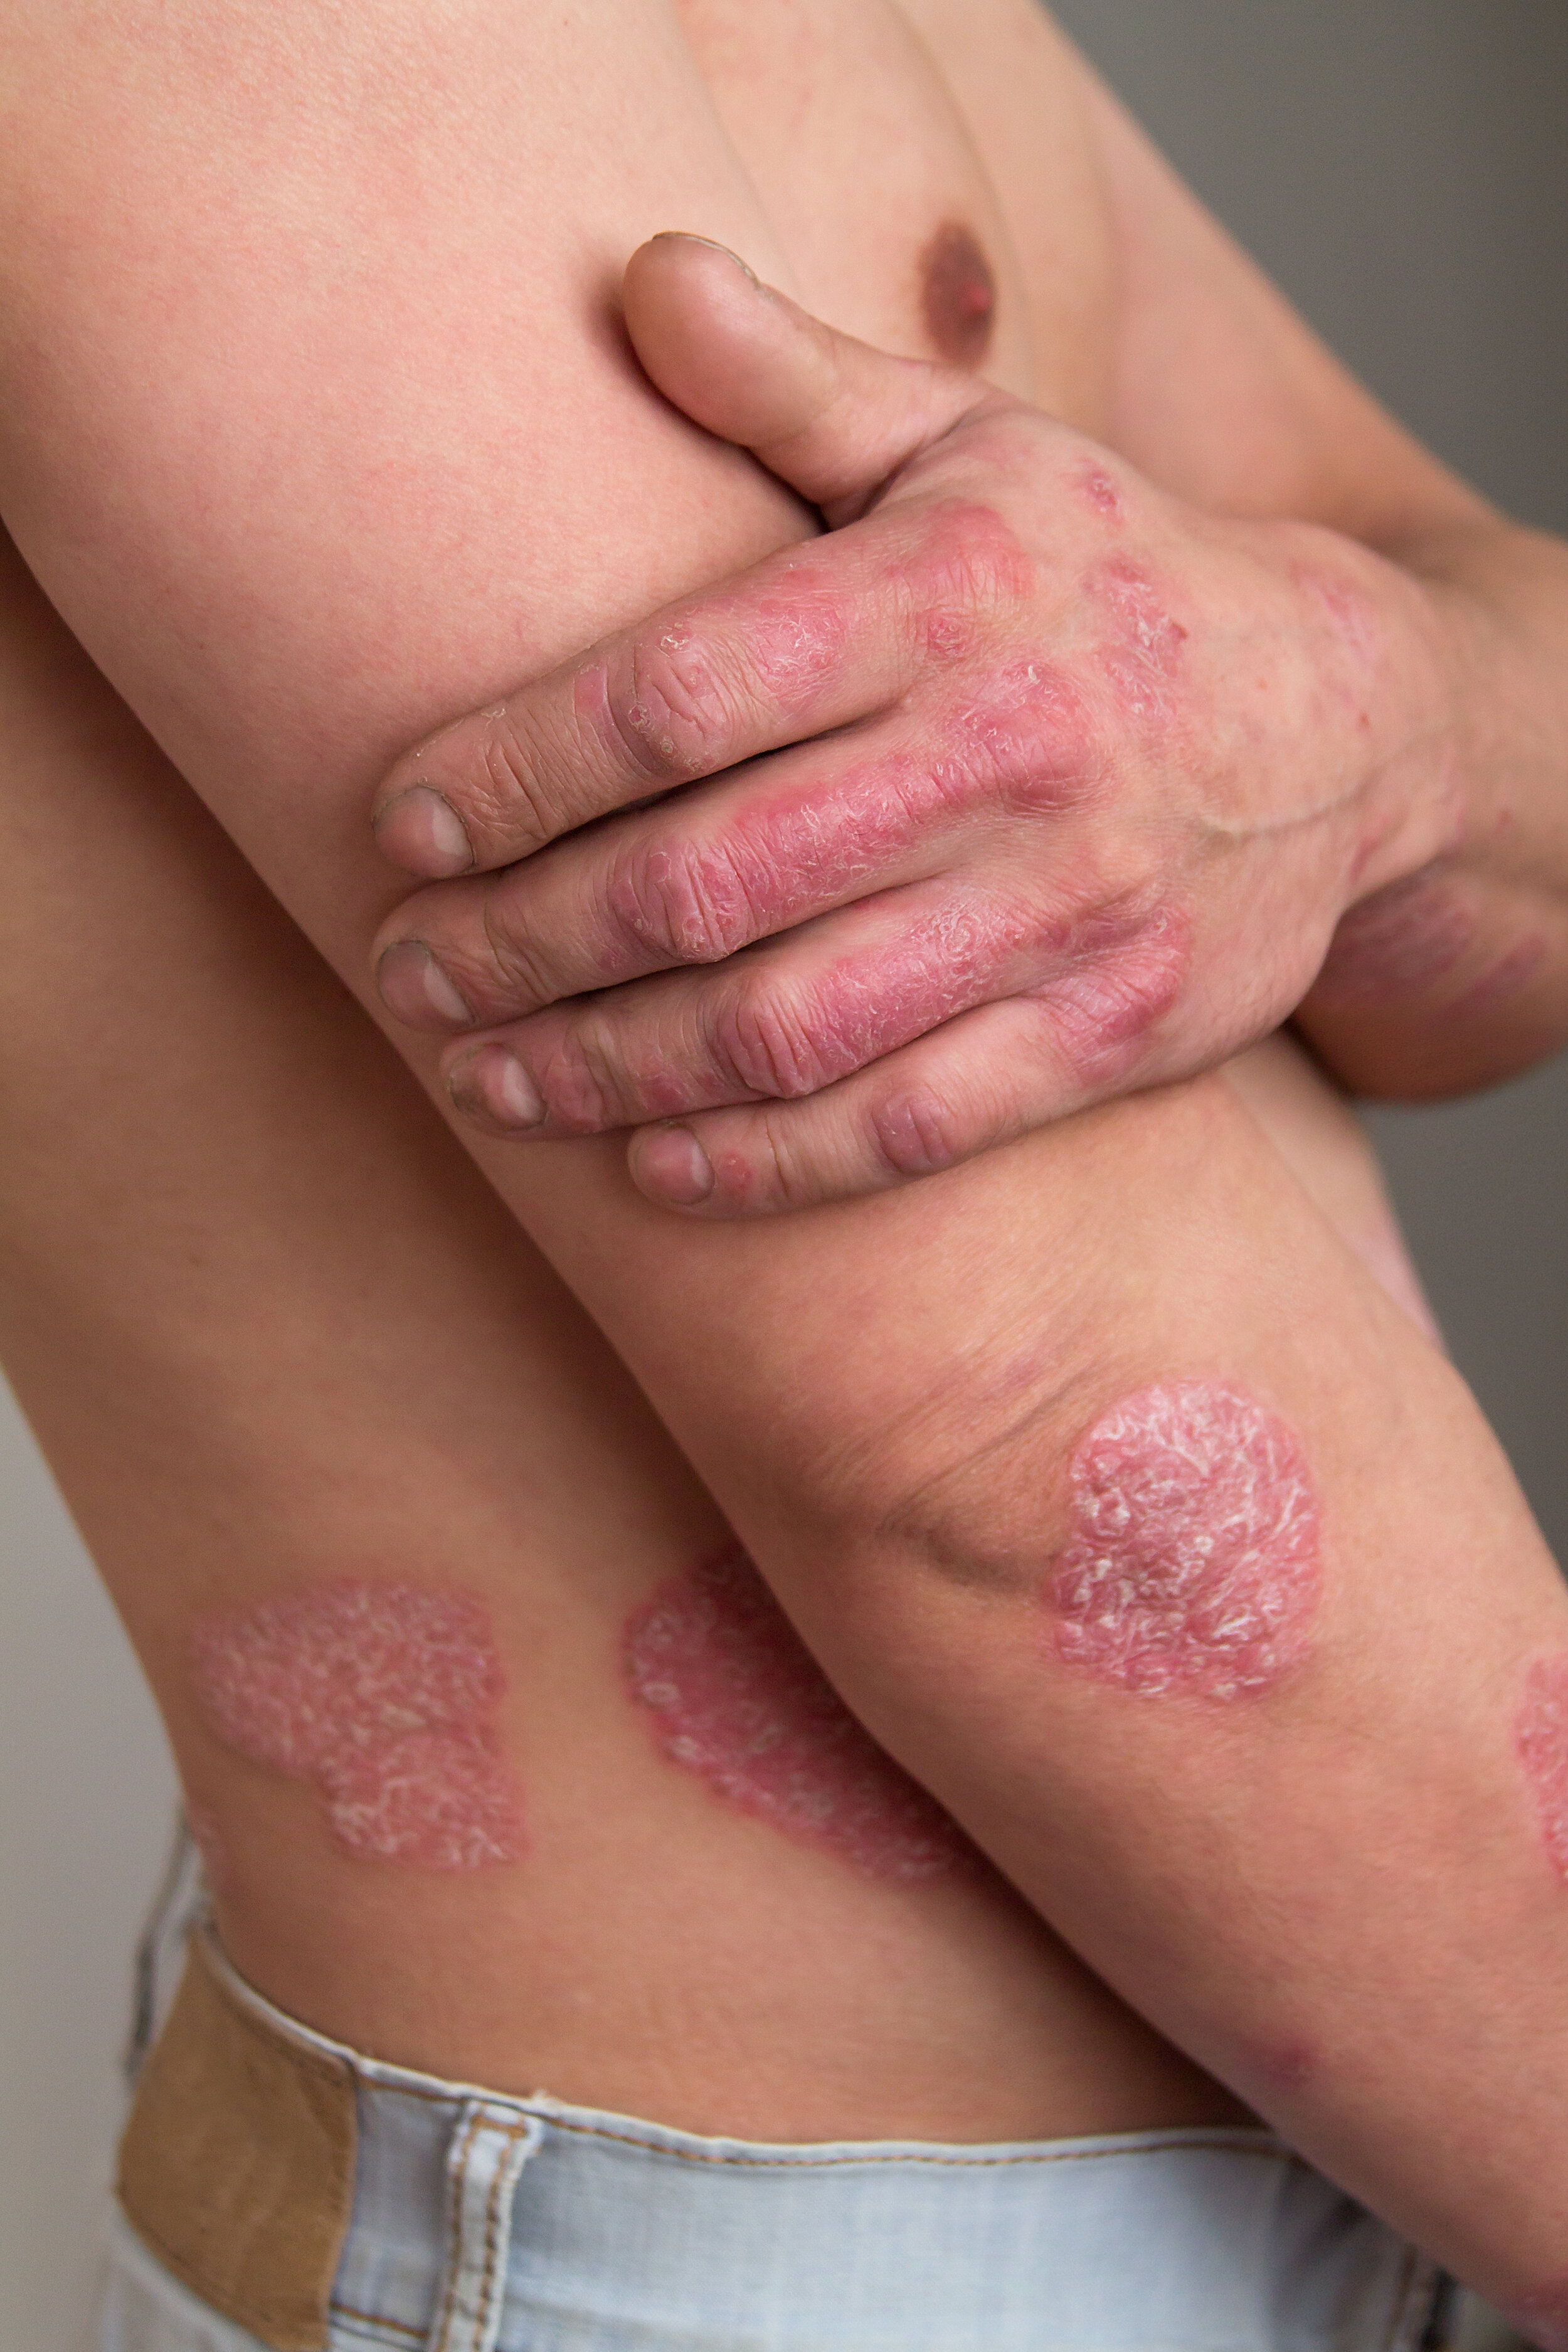 is psoriasis: a dominant or recessive gene